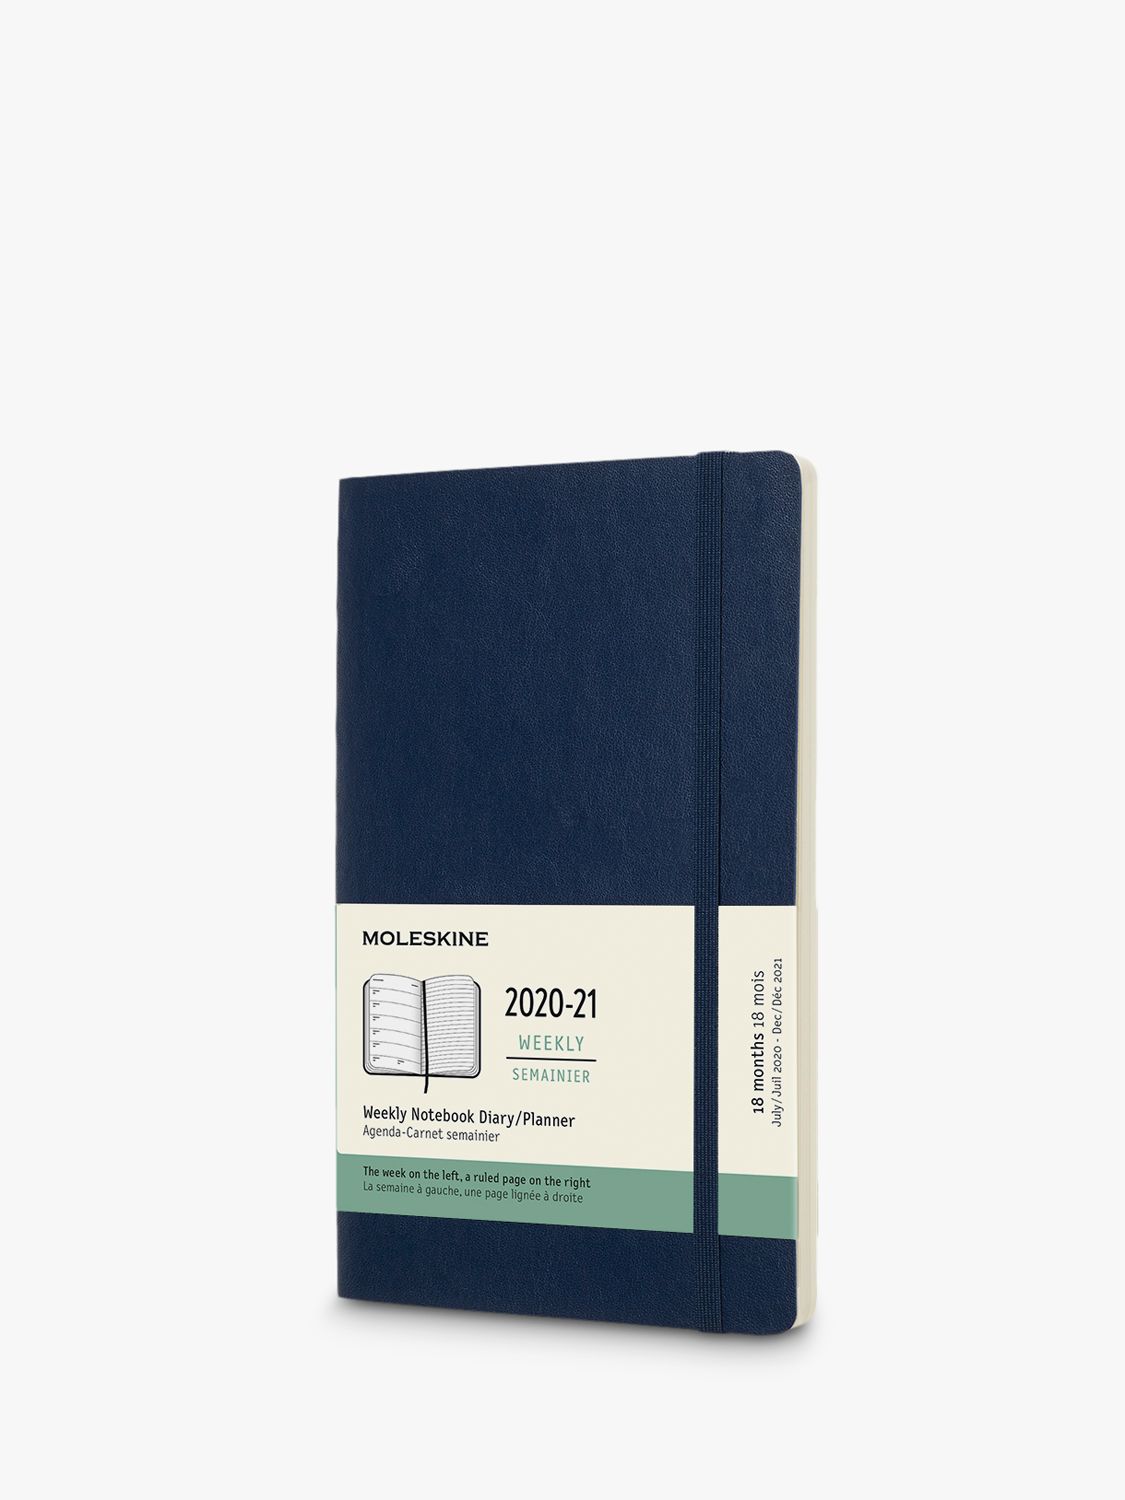 Moleskine Large Softcover Weekly Mid Year Academic Notebook Diary 2020